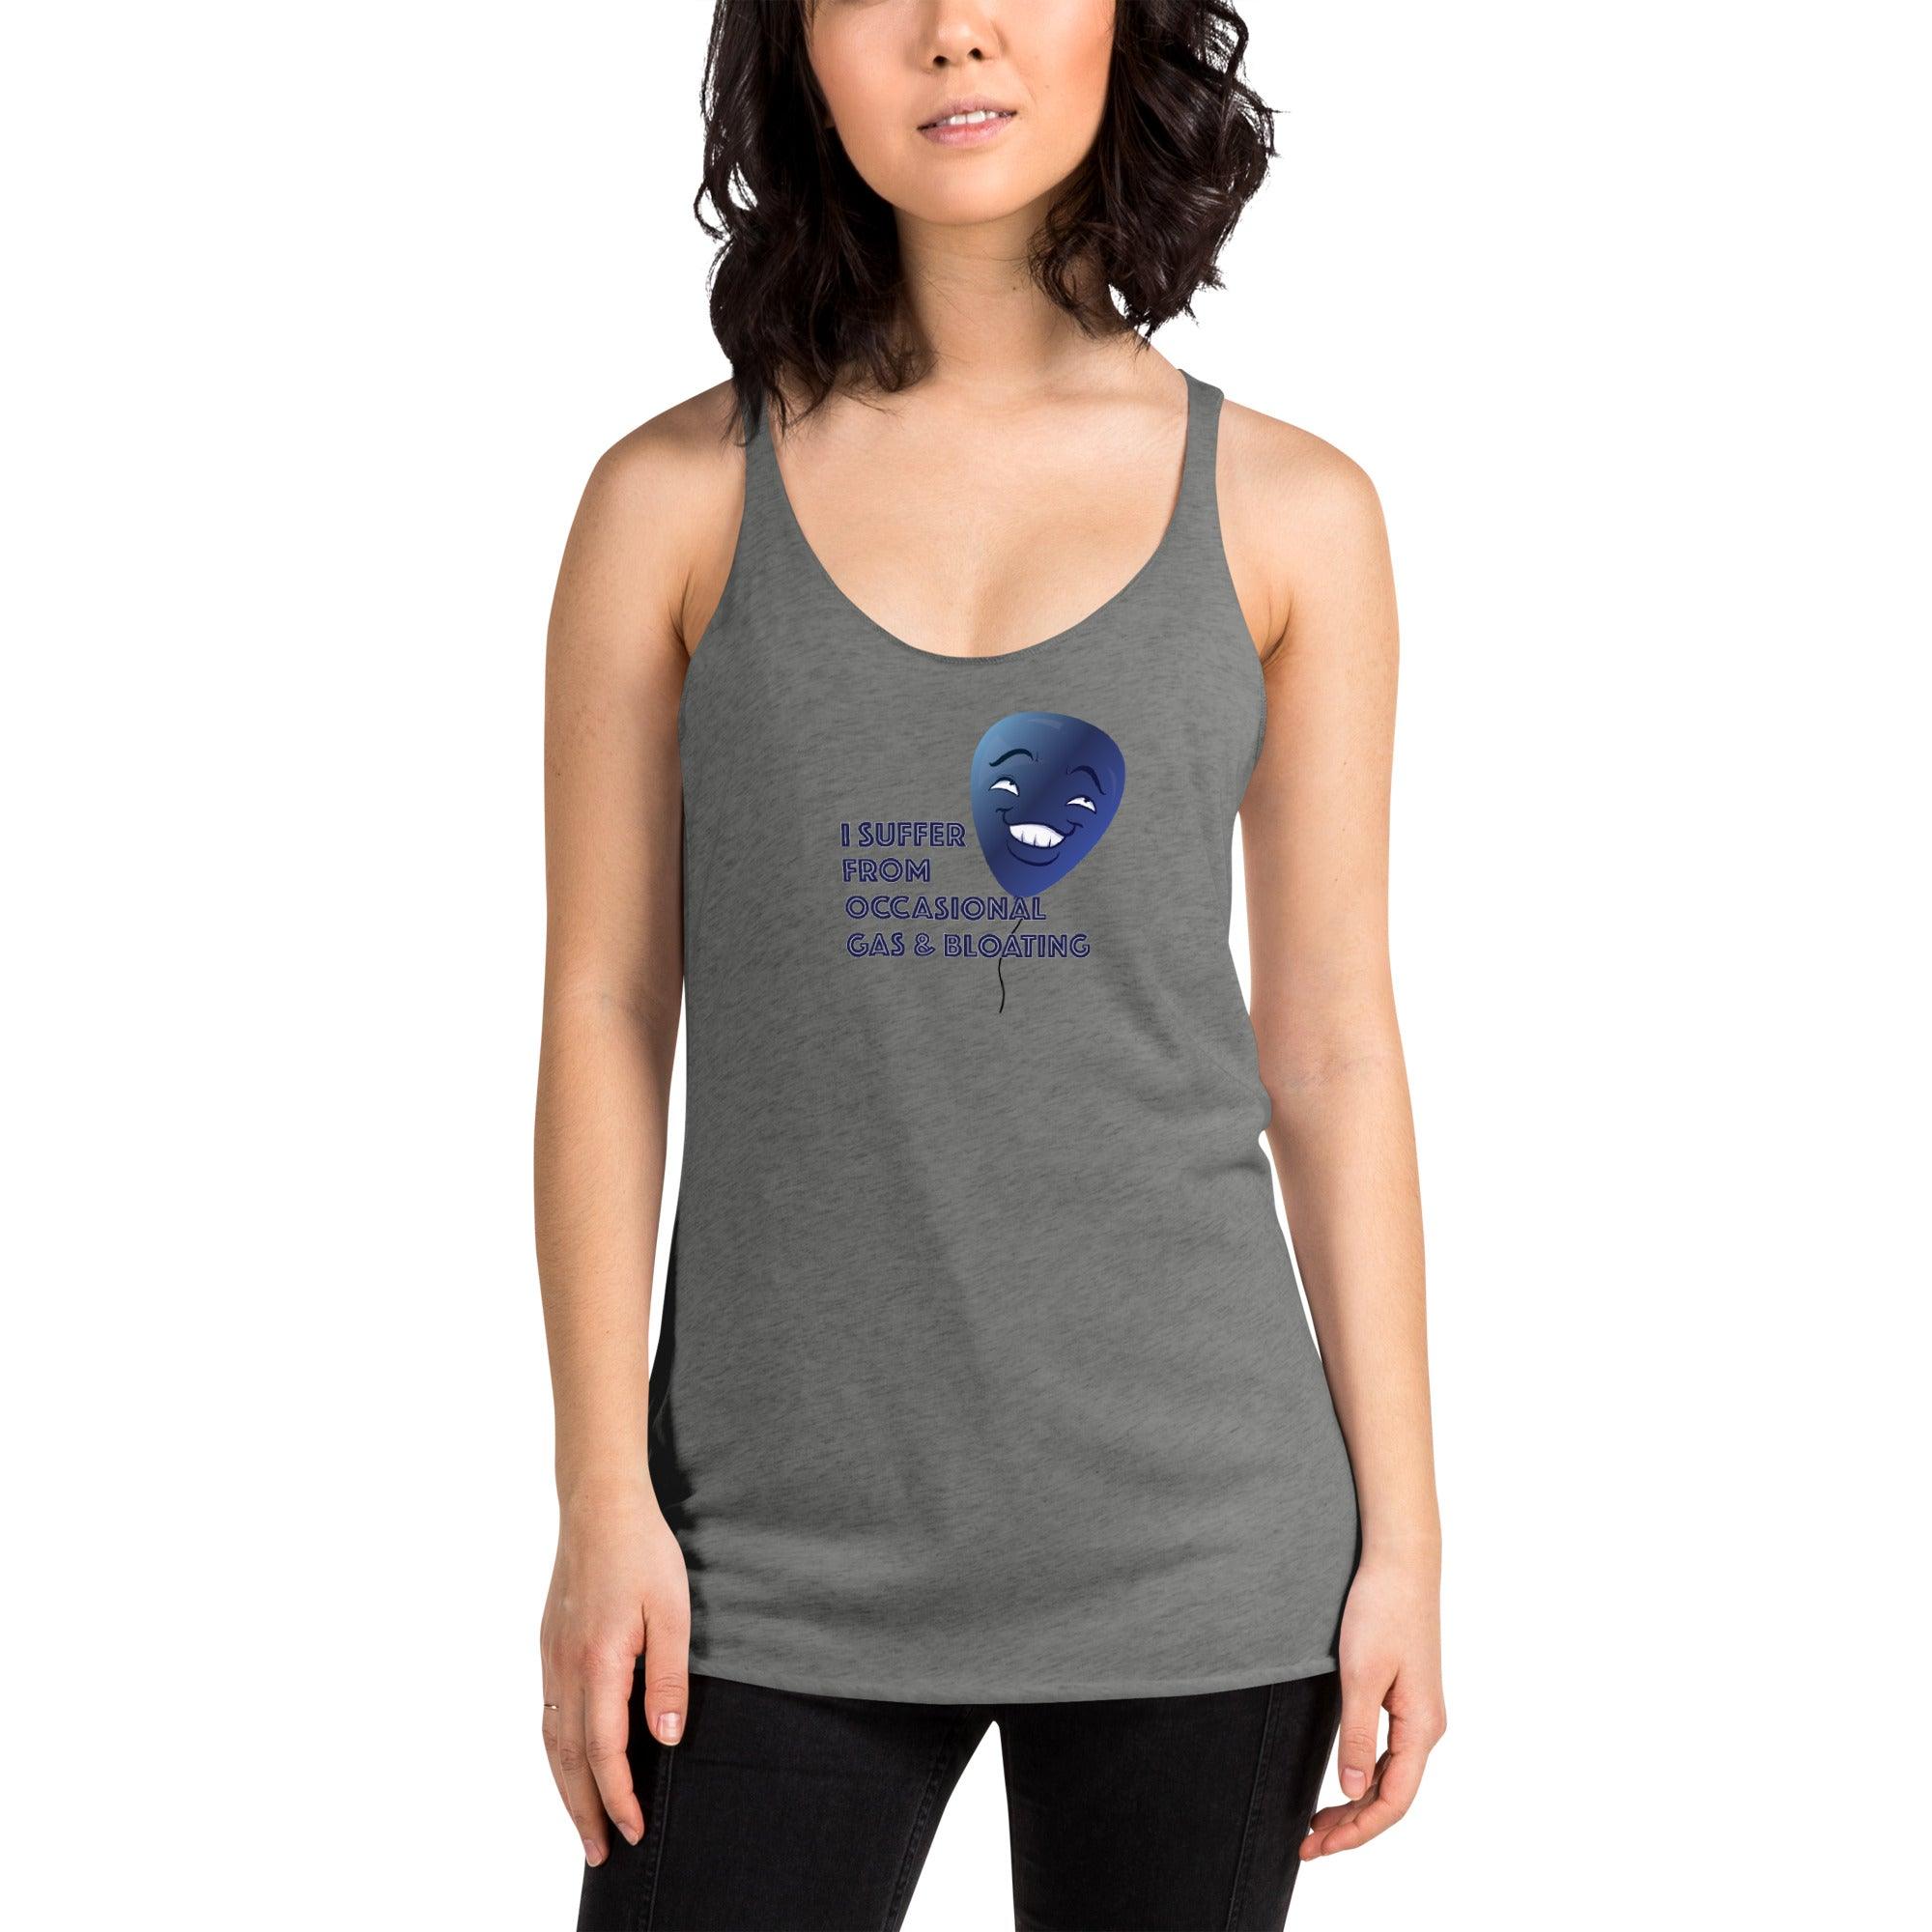 I Suffer From Occasional Gas and Bloating  Women's Racerback Tank